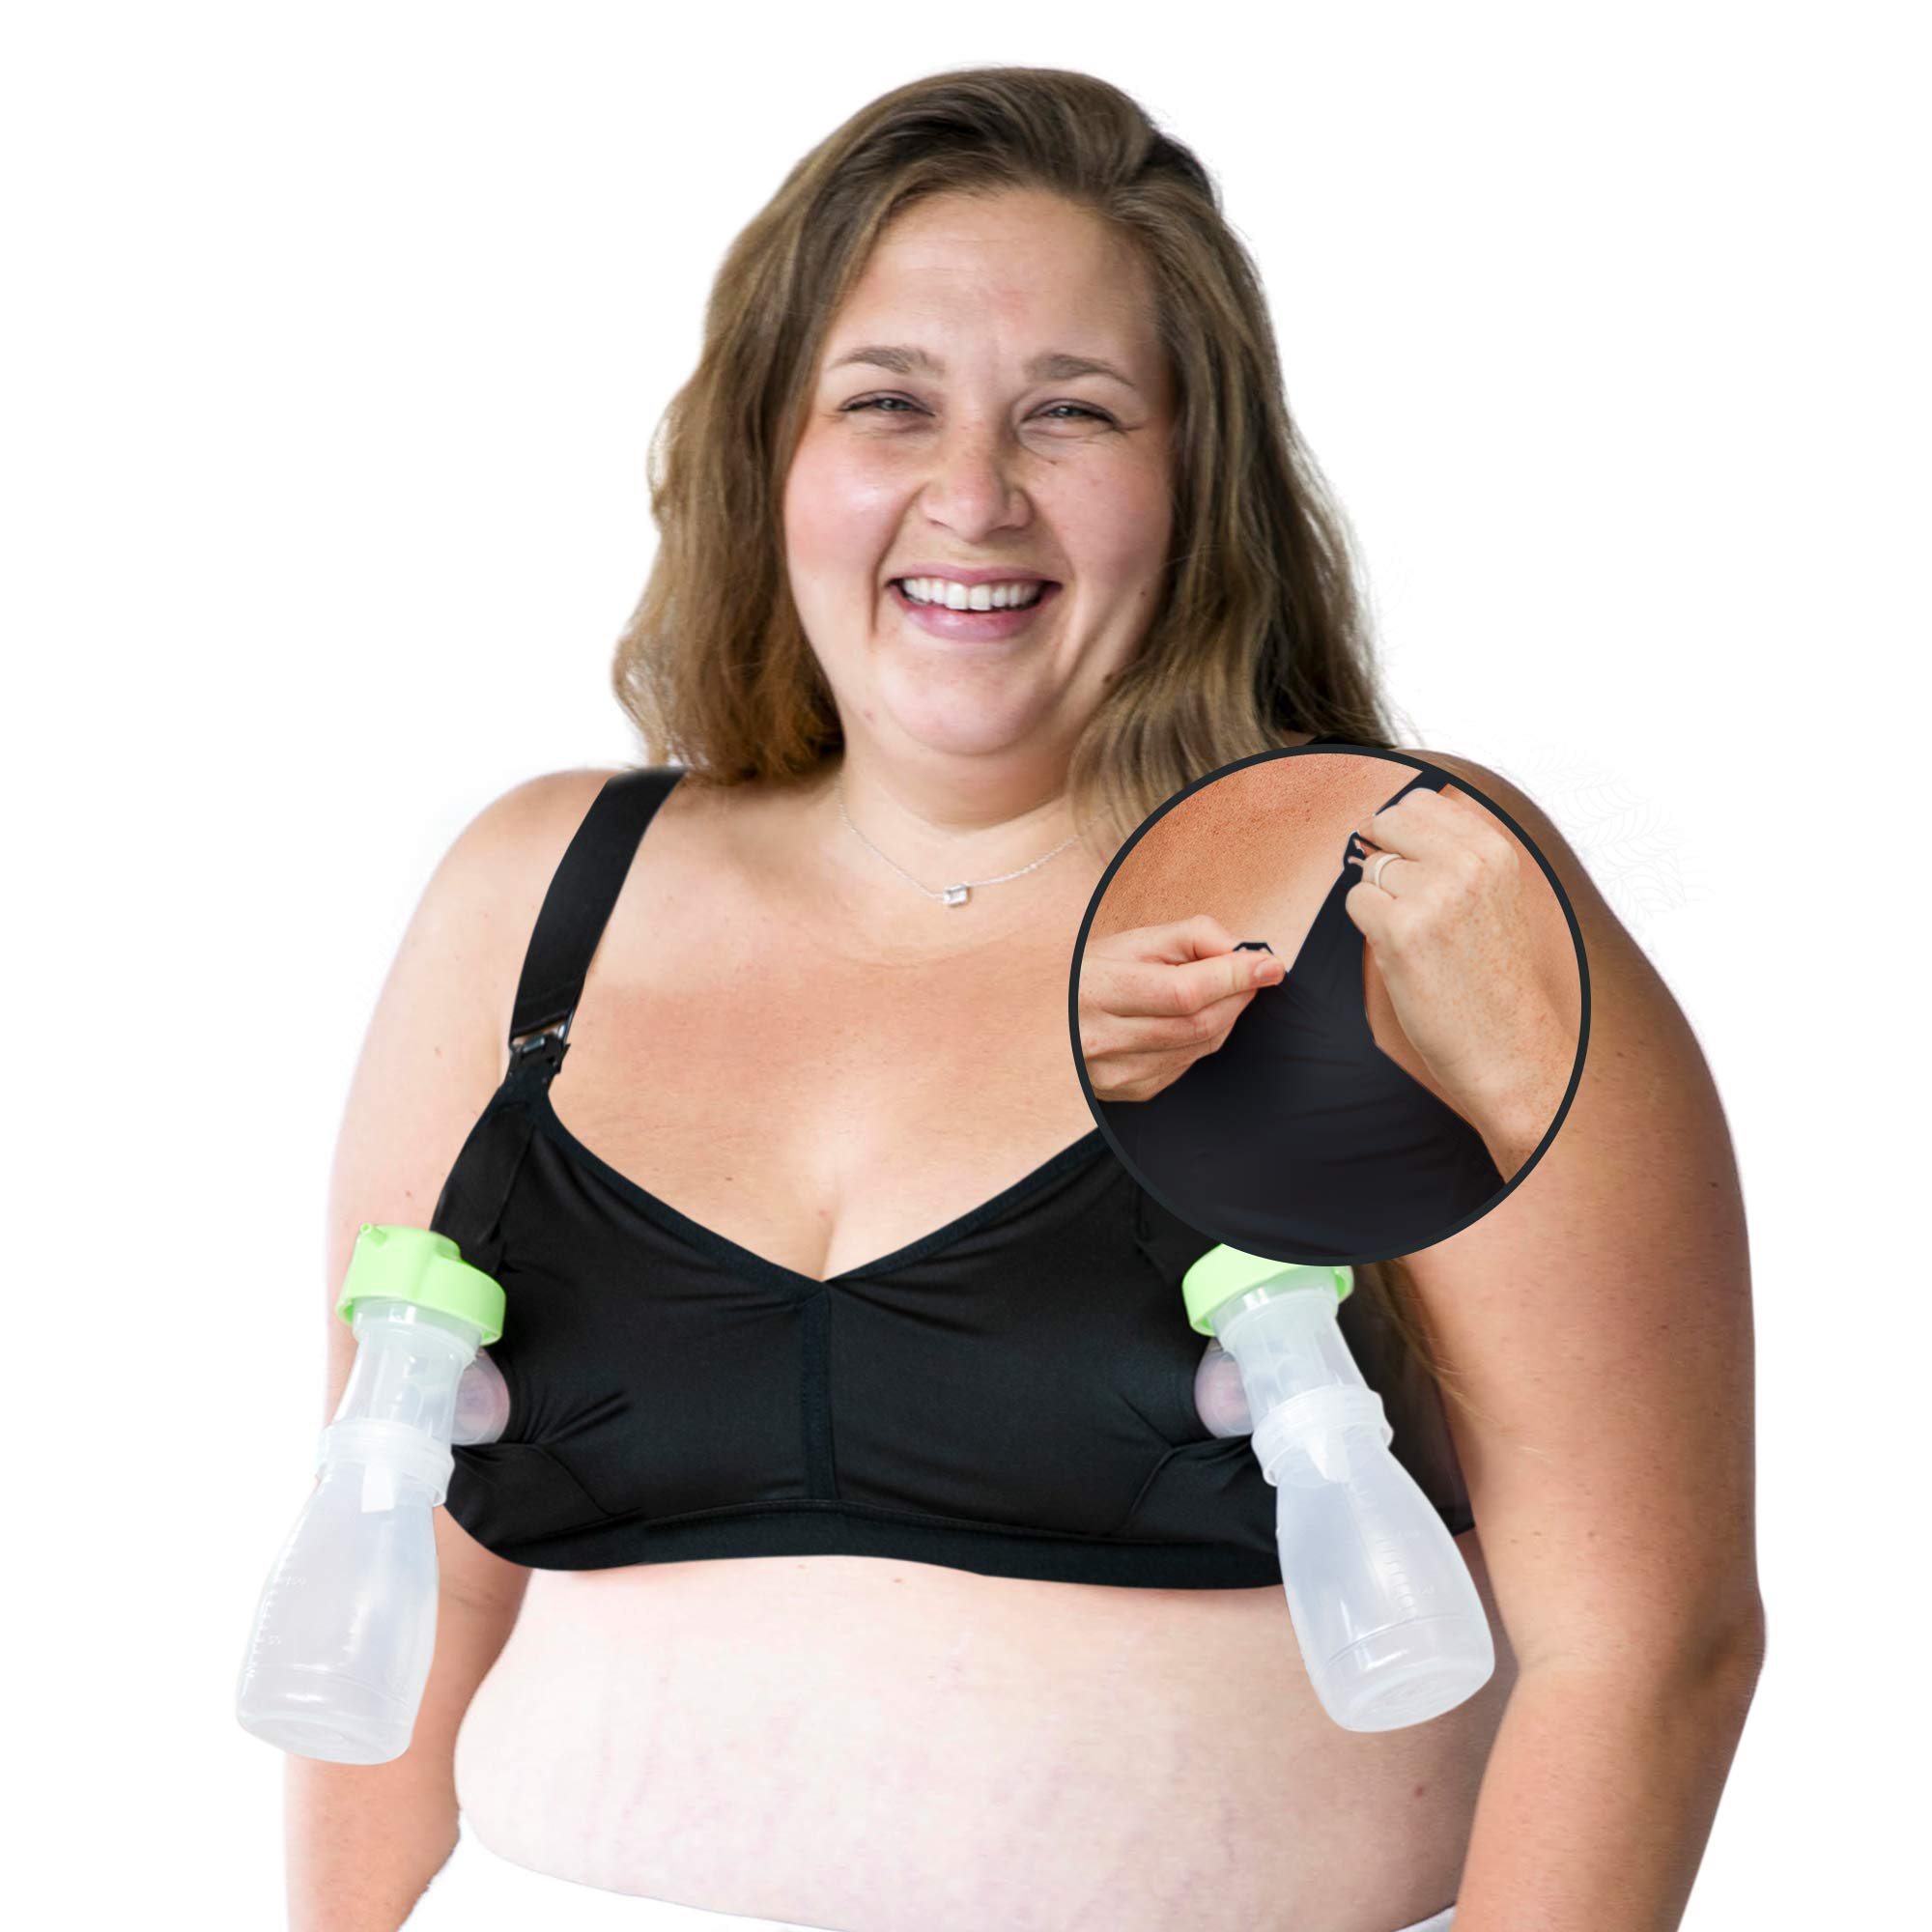 The Dairy Fairy - Handsfree Pumping and Nursing Bra, Everyday Bra, Sleep Nursing  Bra, Pumping and Nursing Bra in One, Hands Free